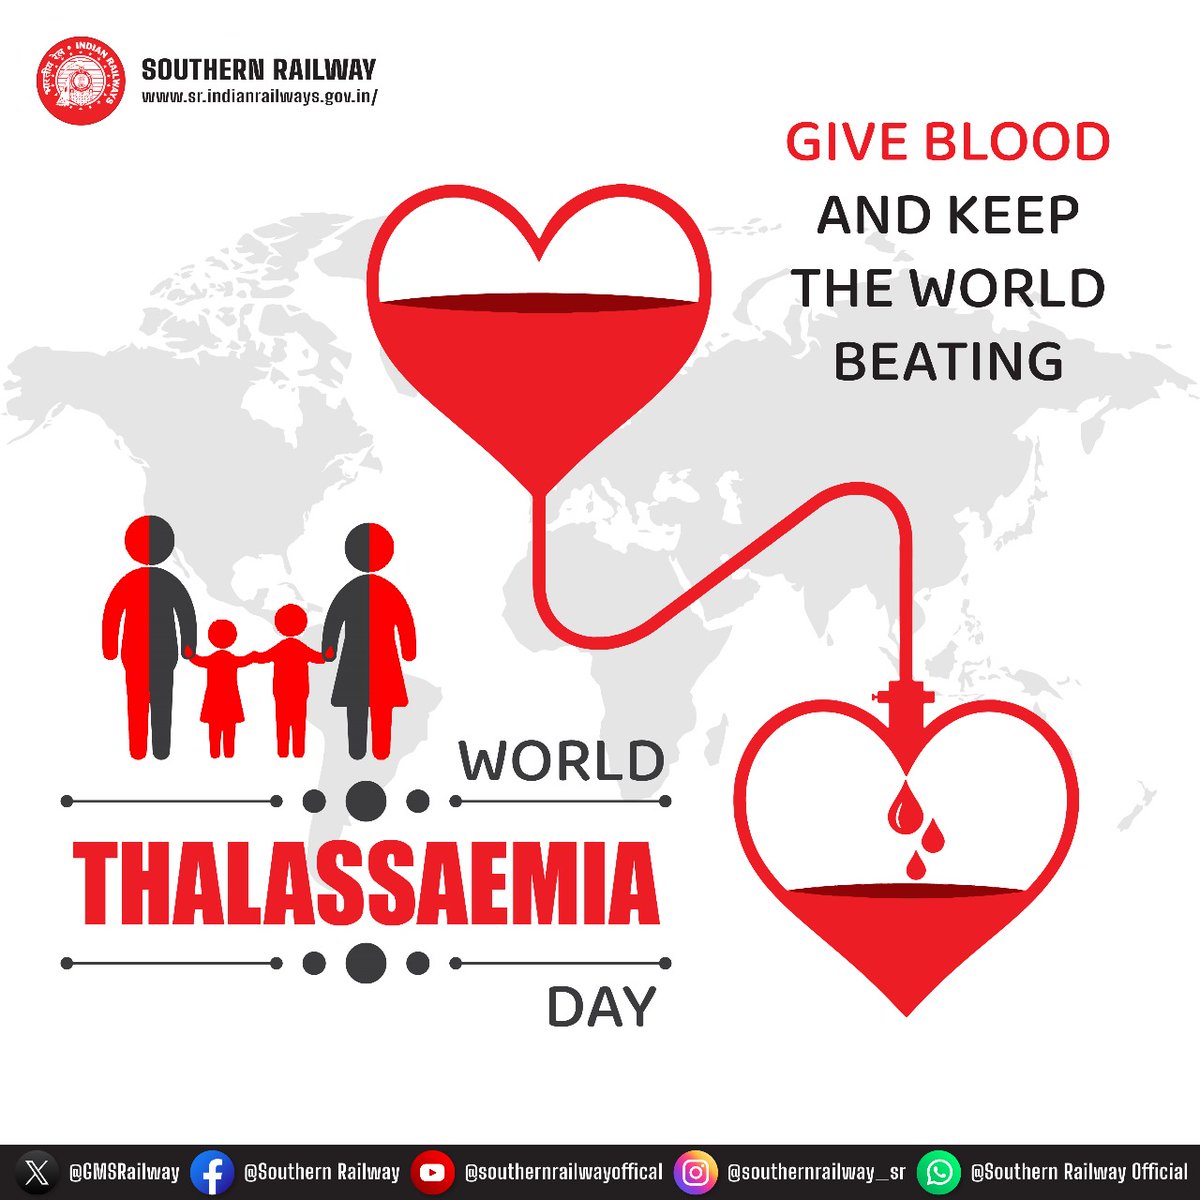 On #WorldThalassemiaDay, let's raise awareness about thalassemia and advocate for early detection, effective treatments, and continued research. Together, we can improve the quality of life for those living with this condition. #SouthernRailway